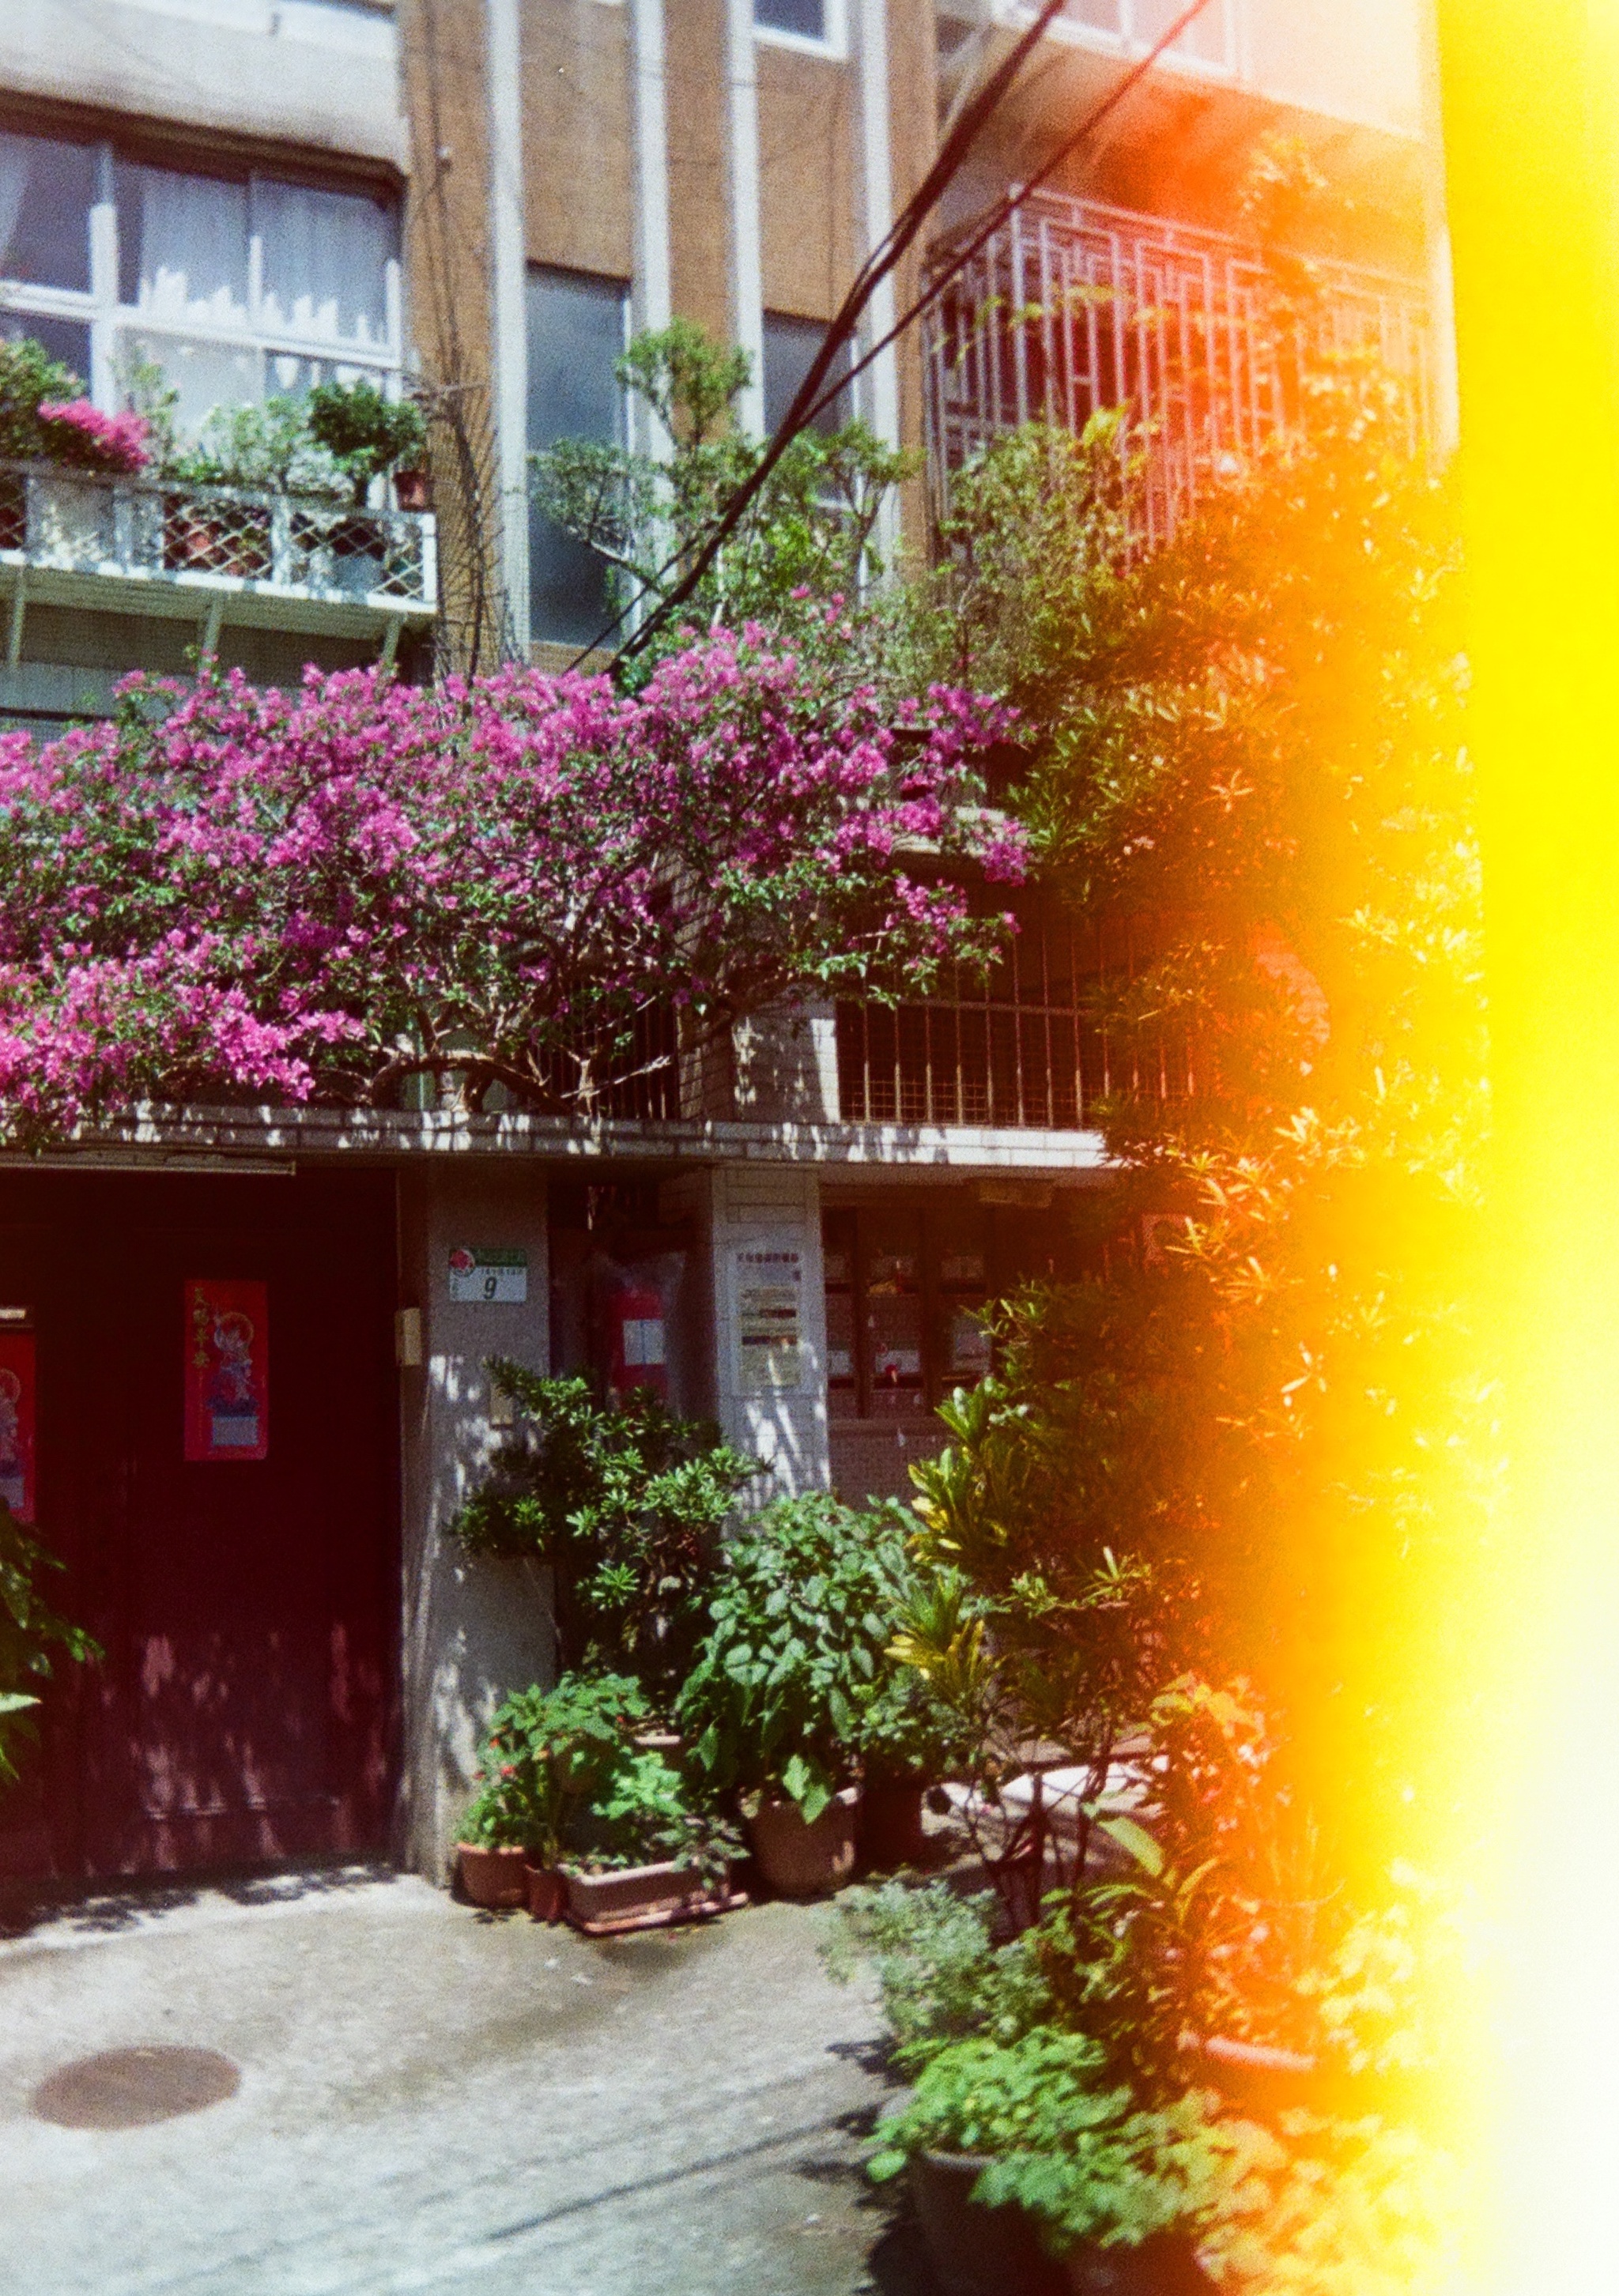 Light bleed on the right, flowers growing out of buildings and potted plants on the street.